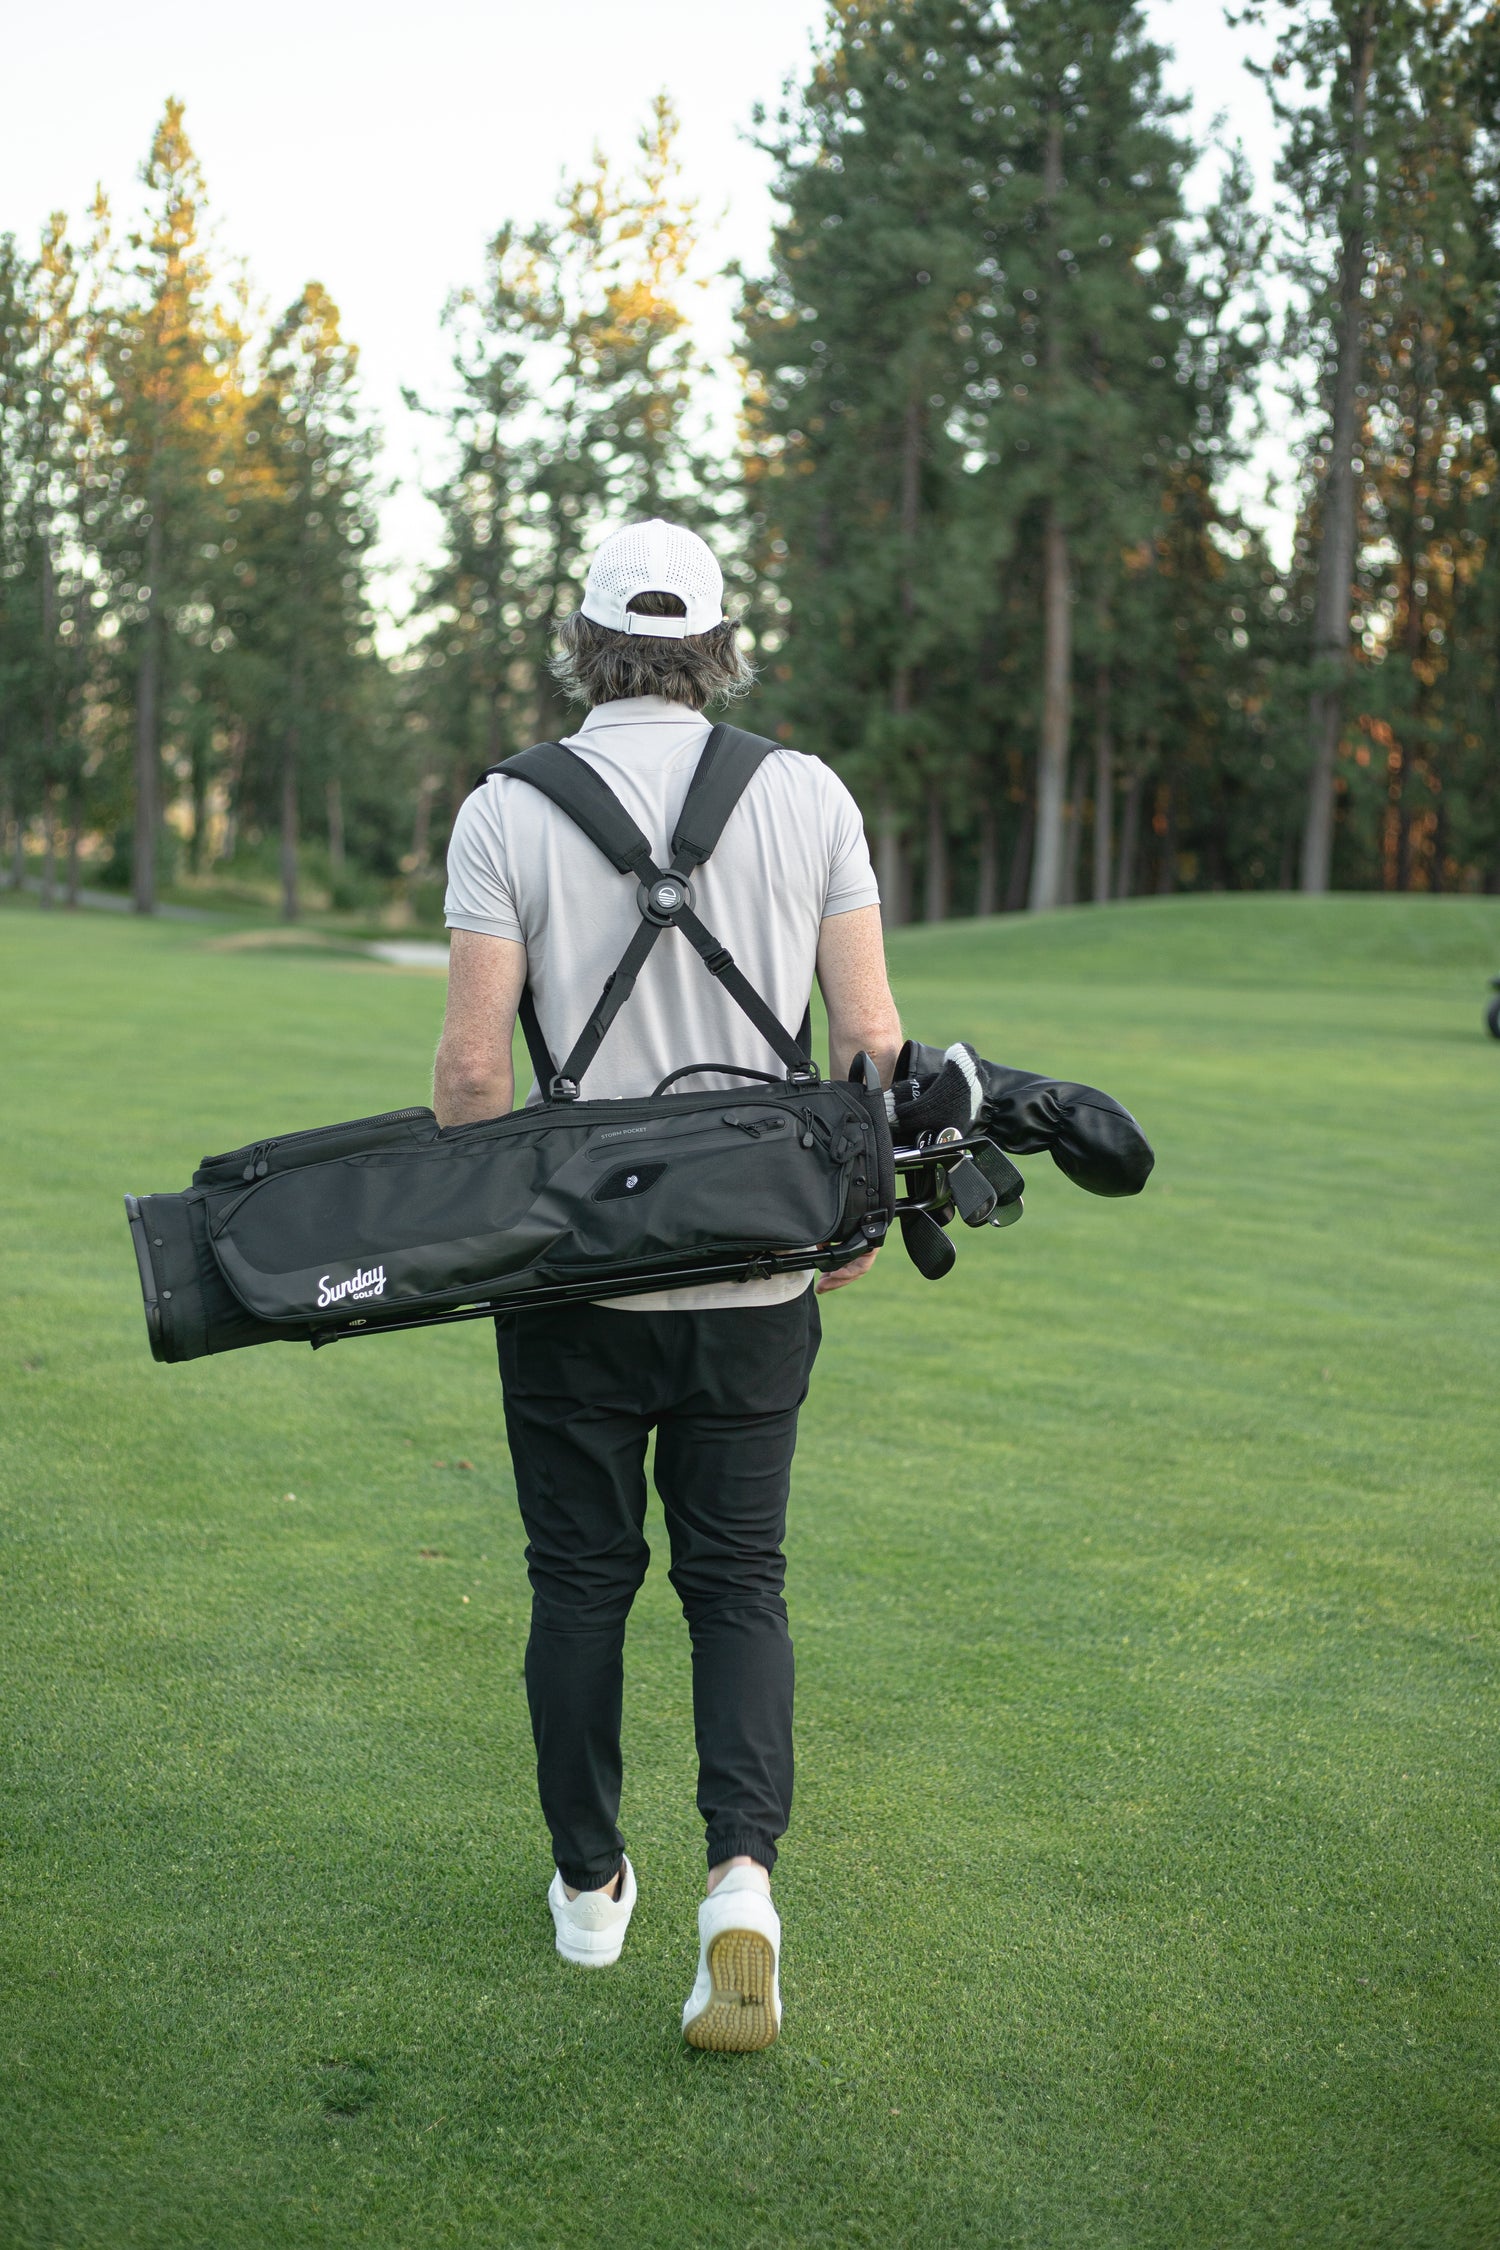 Swing Into Better Health: The Physical and Mental Benefits of Golf